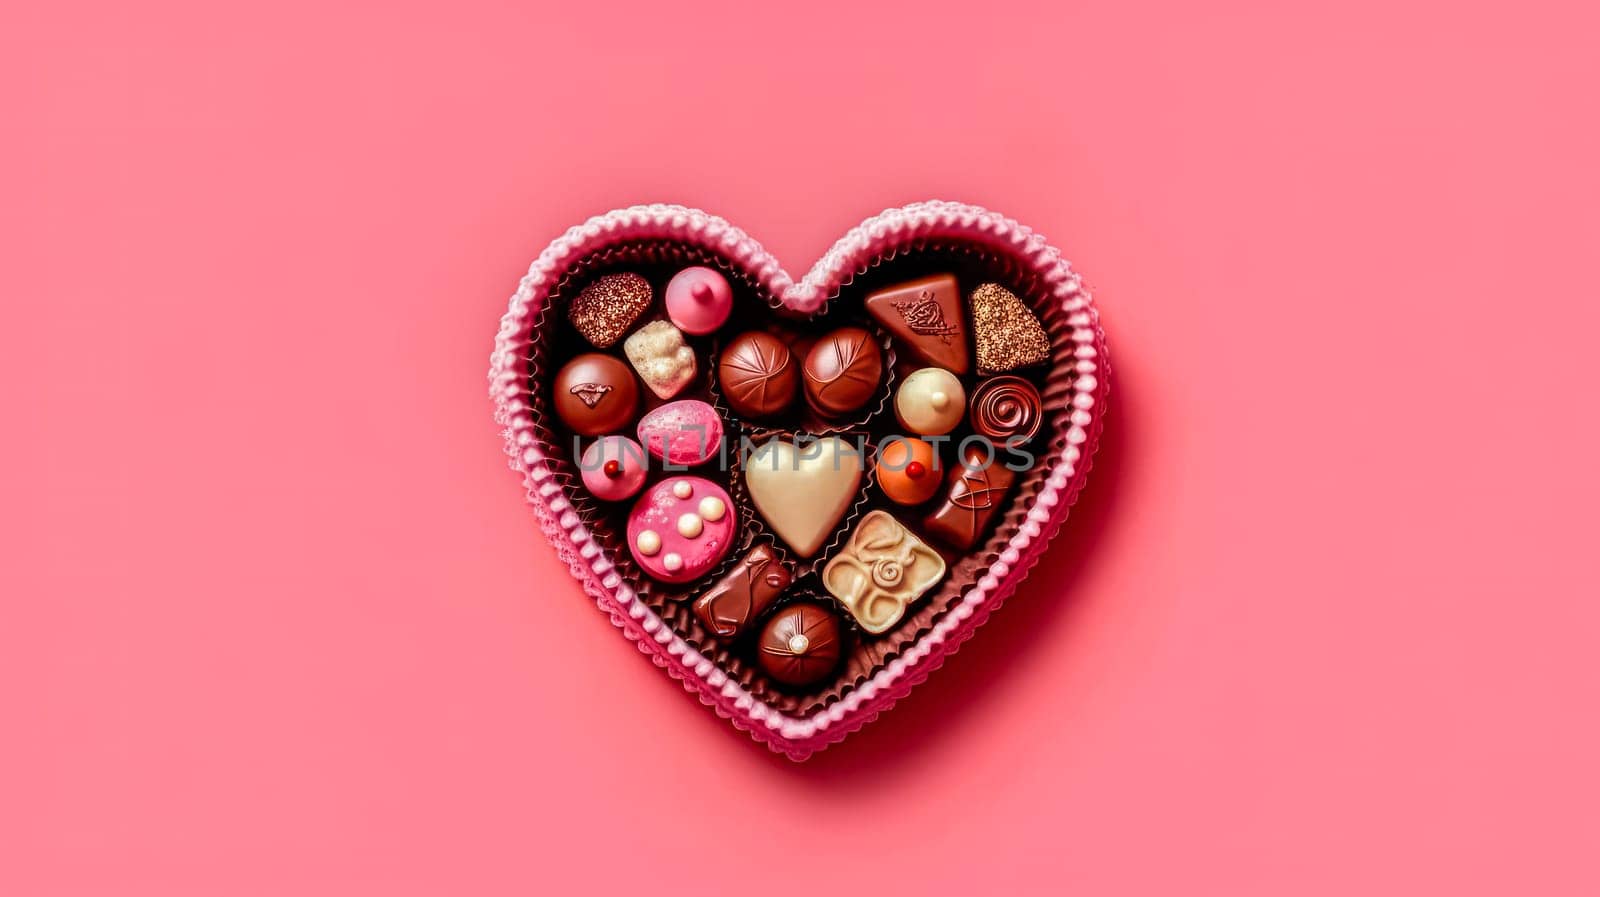 Delight your senses with heart shaped candies in a charming box on a pink background by Alla_Morozova93